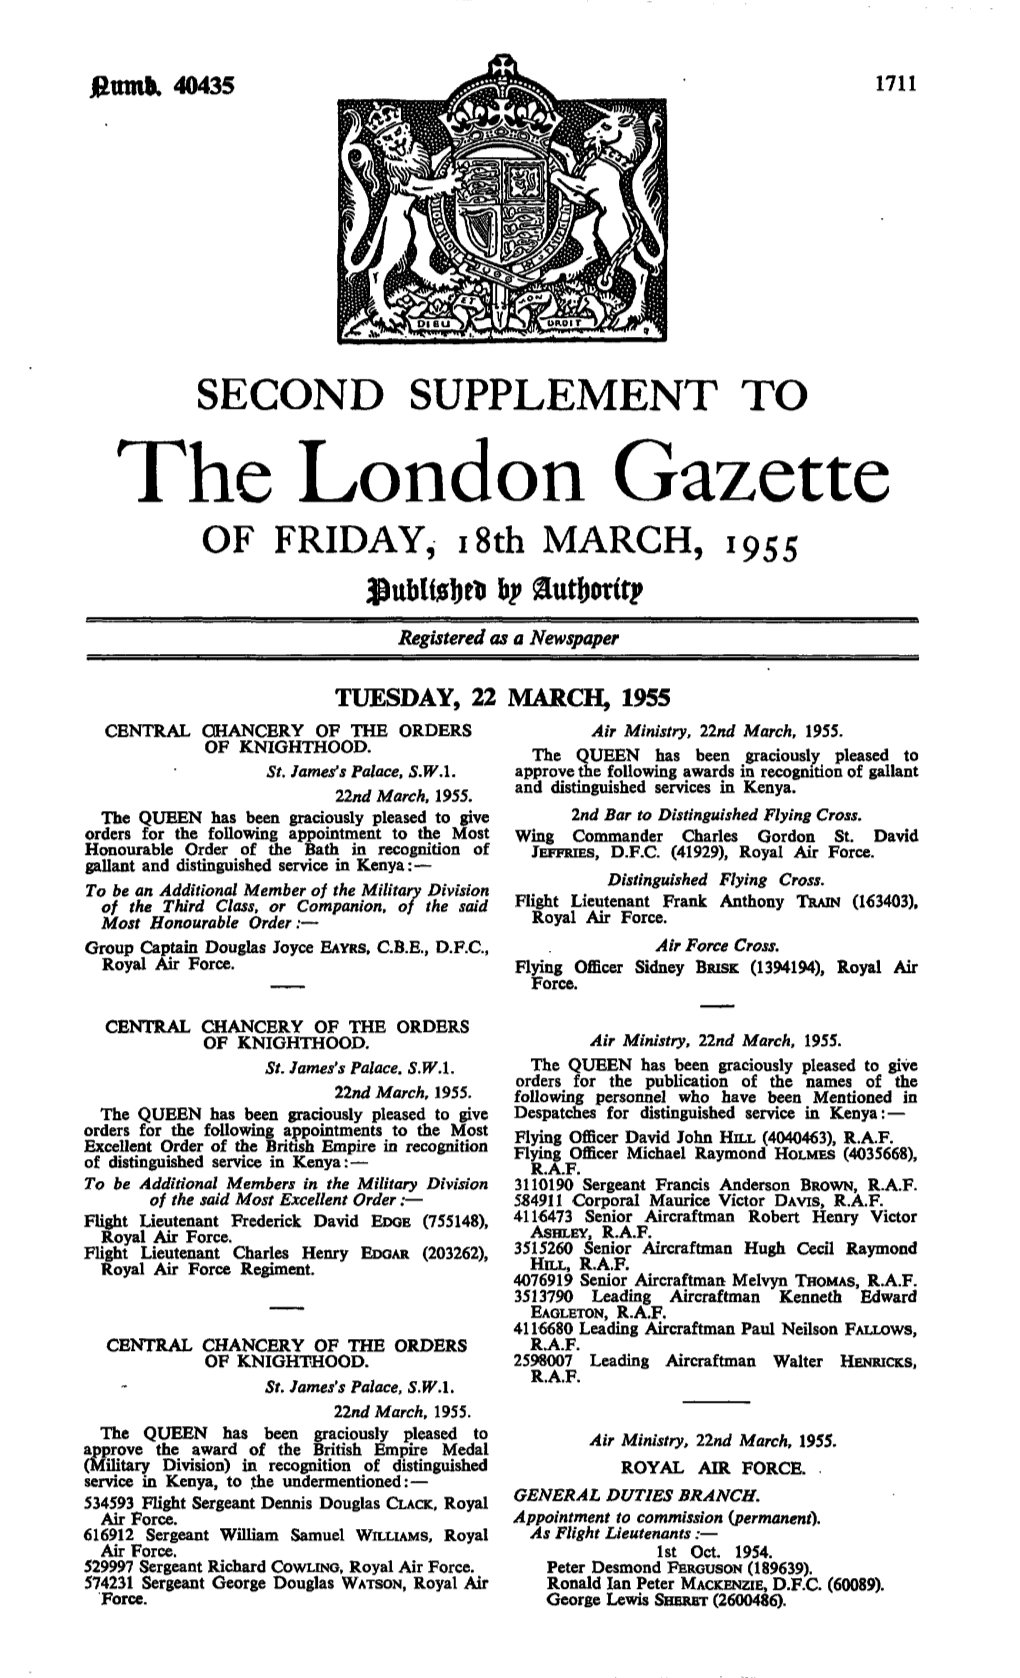 The London Gazette of FRIDAY, 18Th MARCH, 1955